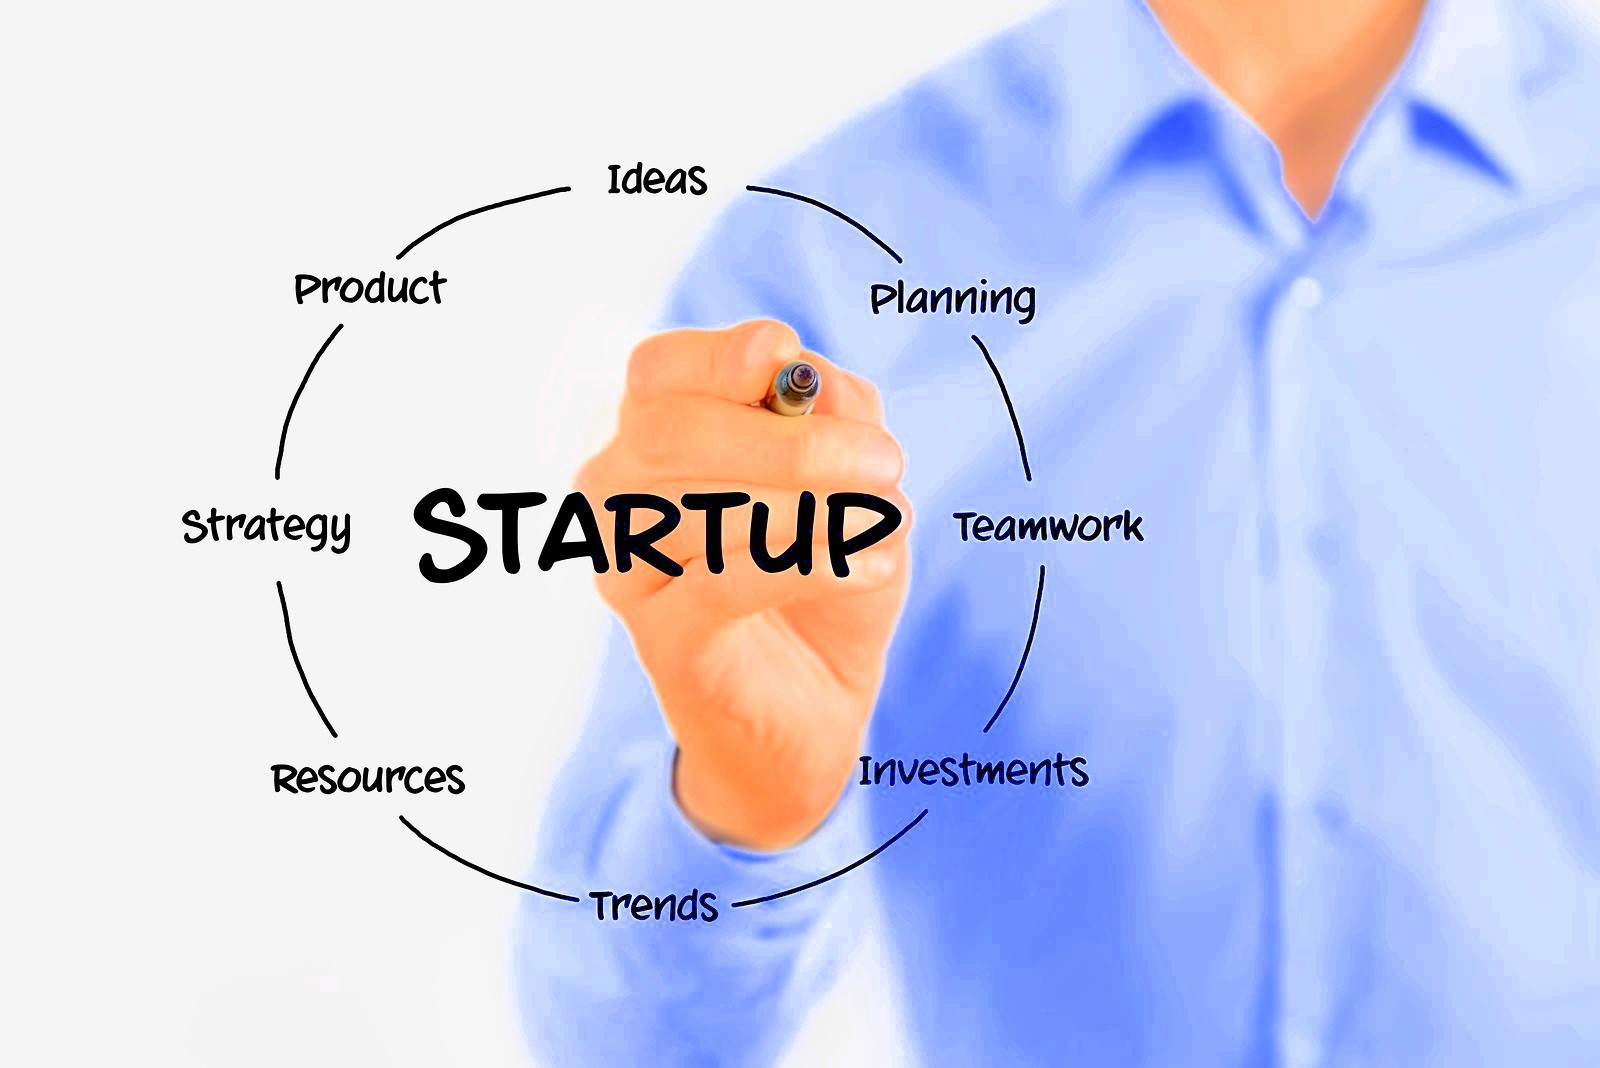 How to leverage startup ideas inside corporations – Part 1 – IDEATION